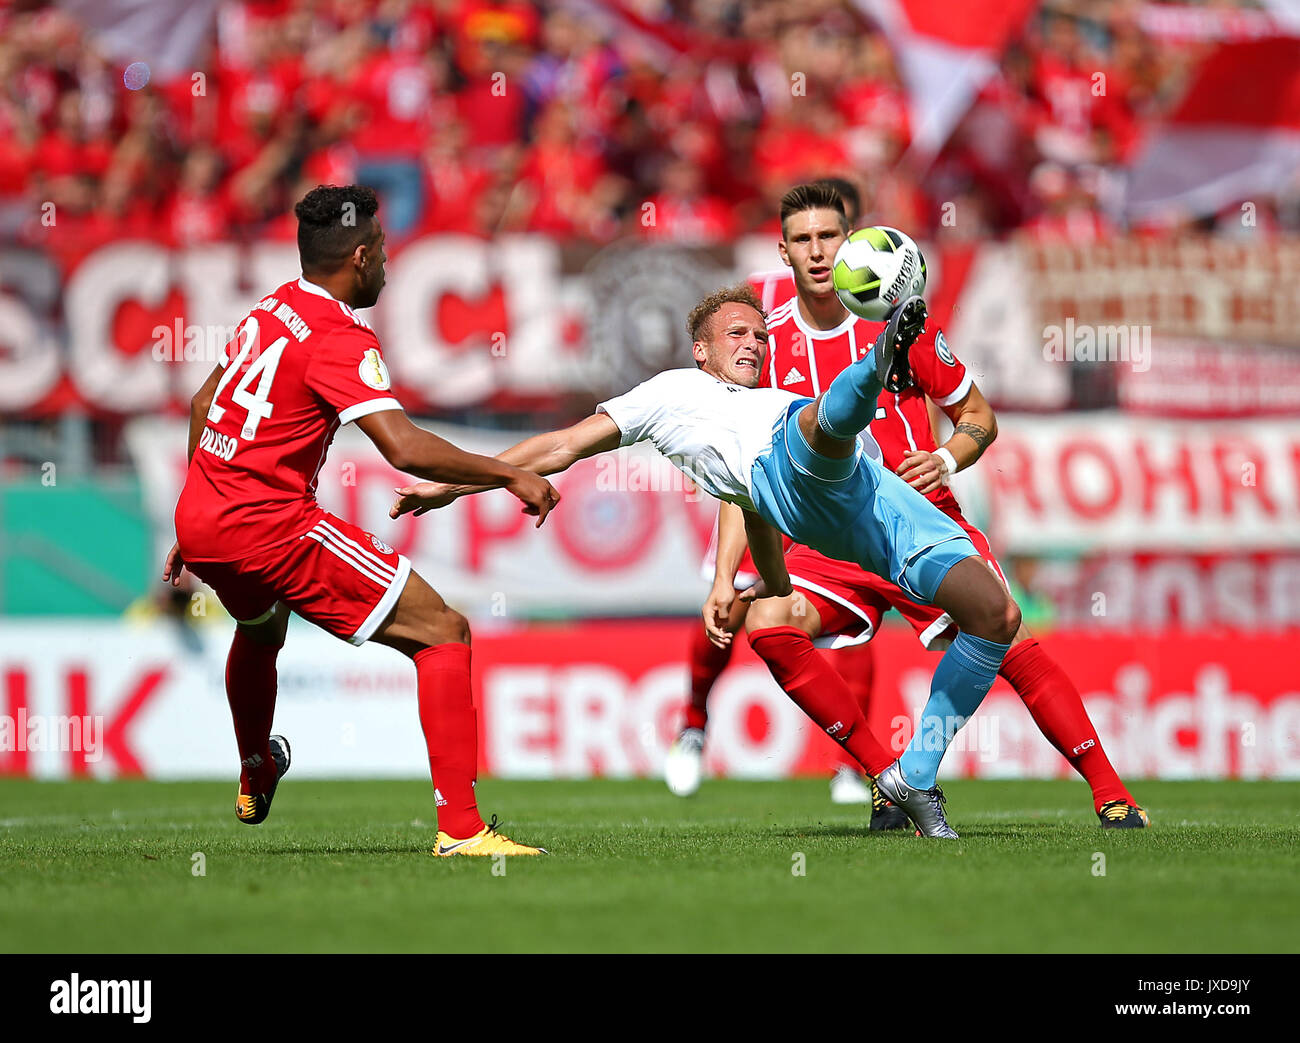 Page 2 - Chemnitzer Fc High Resolution Stock Photography and Images - Alamy